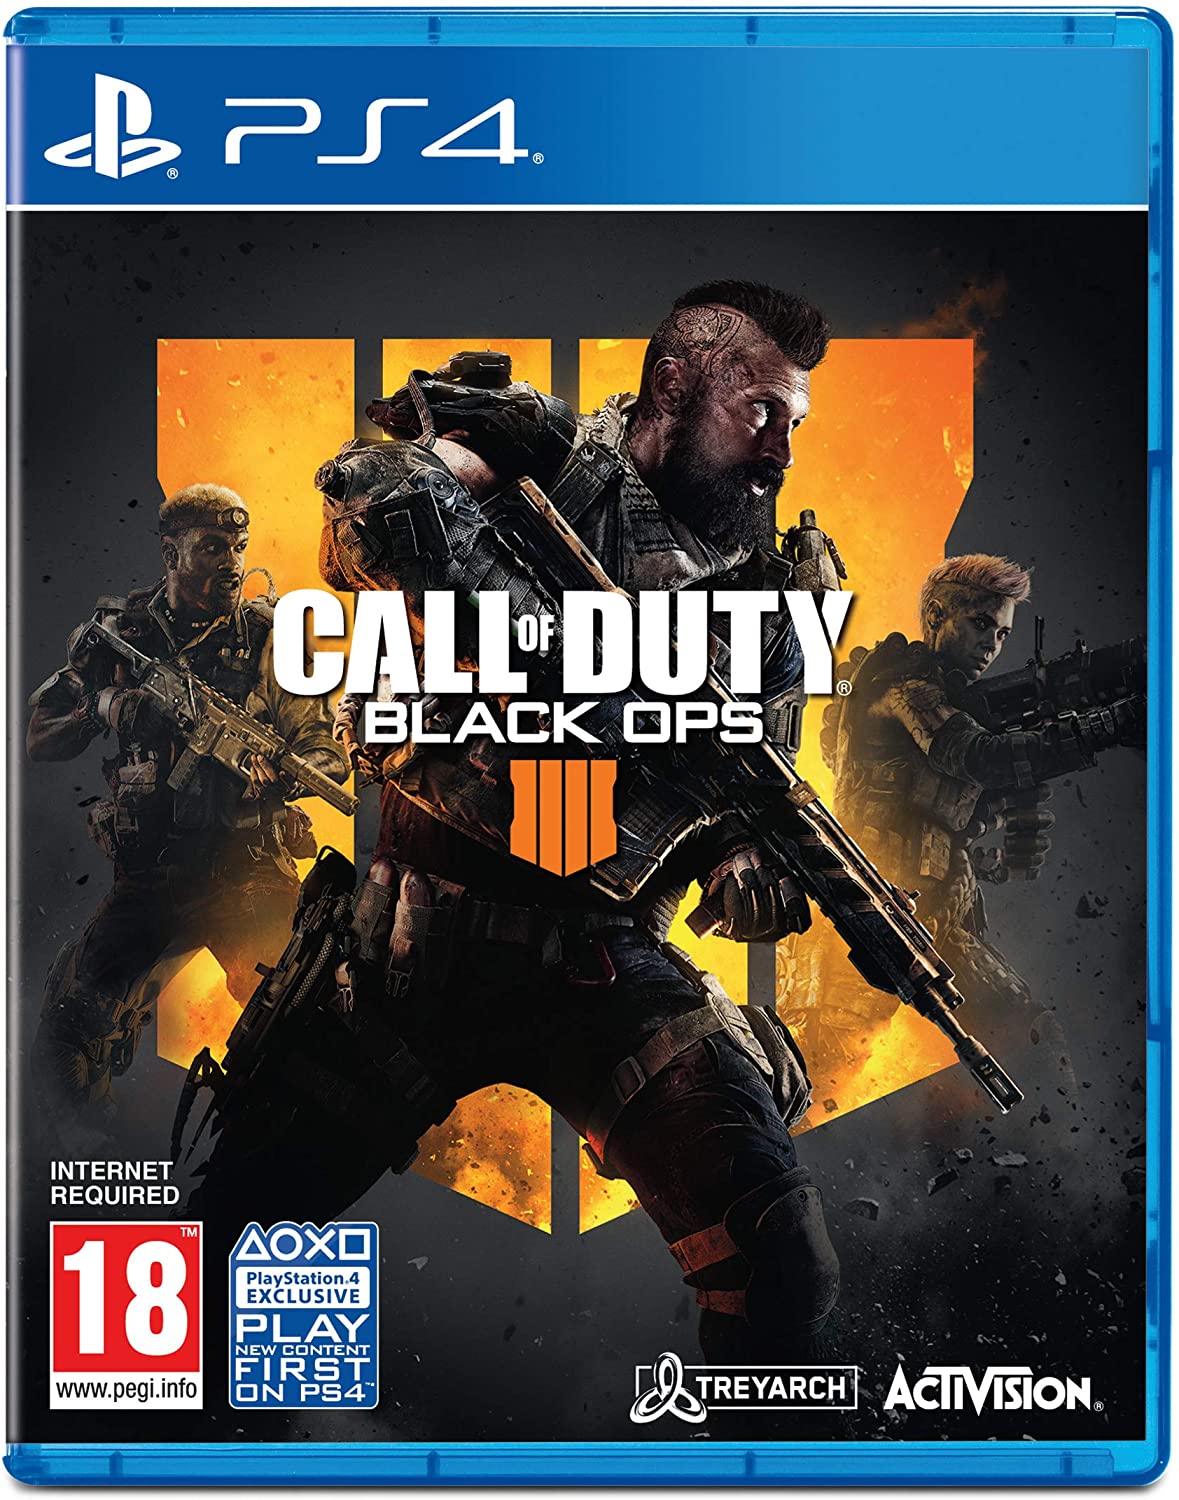 Multiplayer Shooting Games Ps4 rededuct